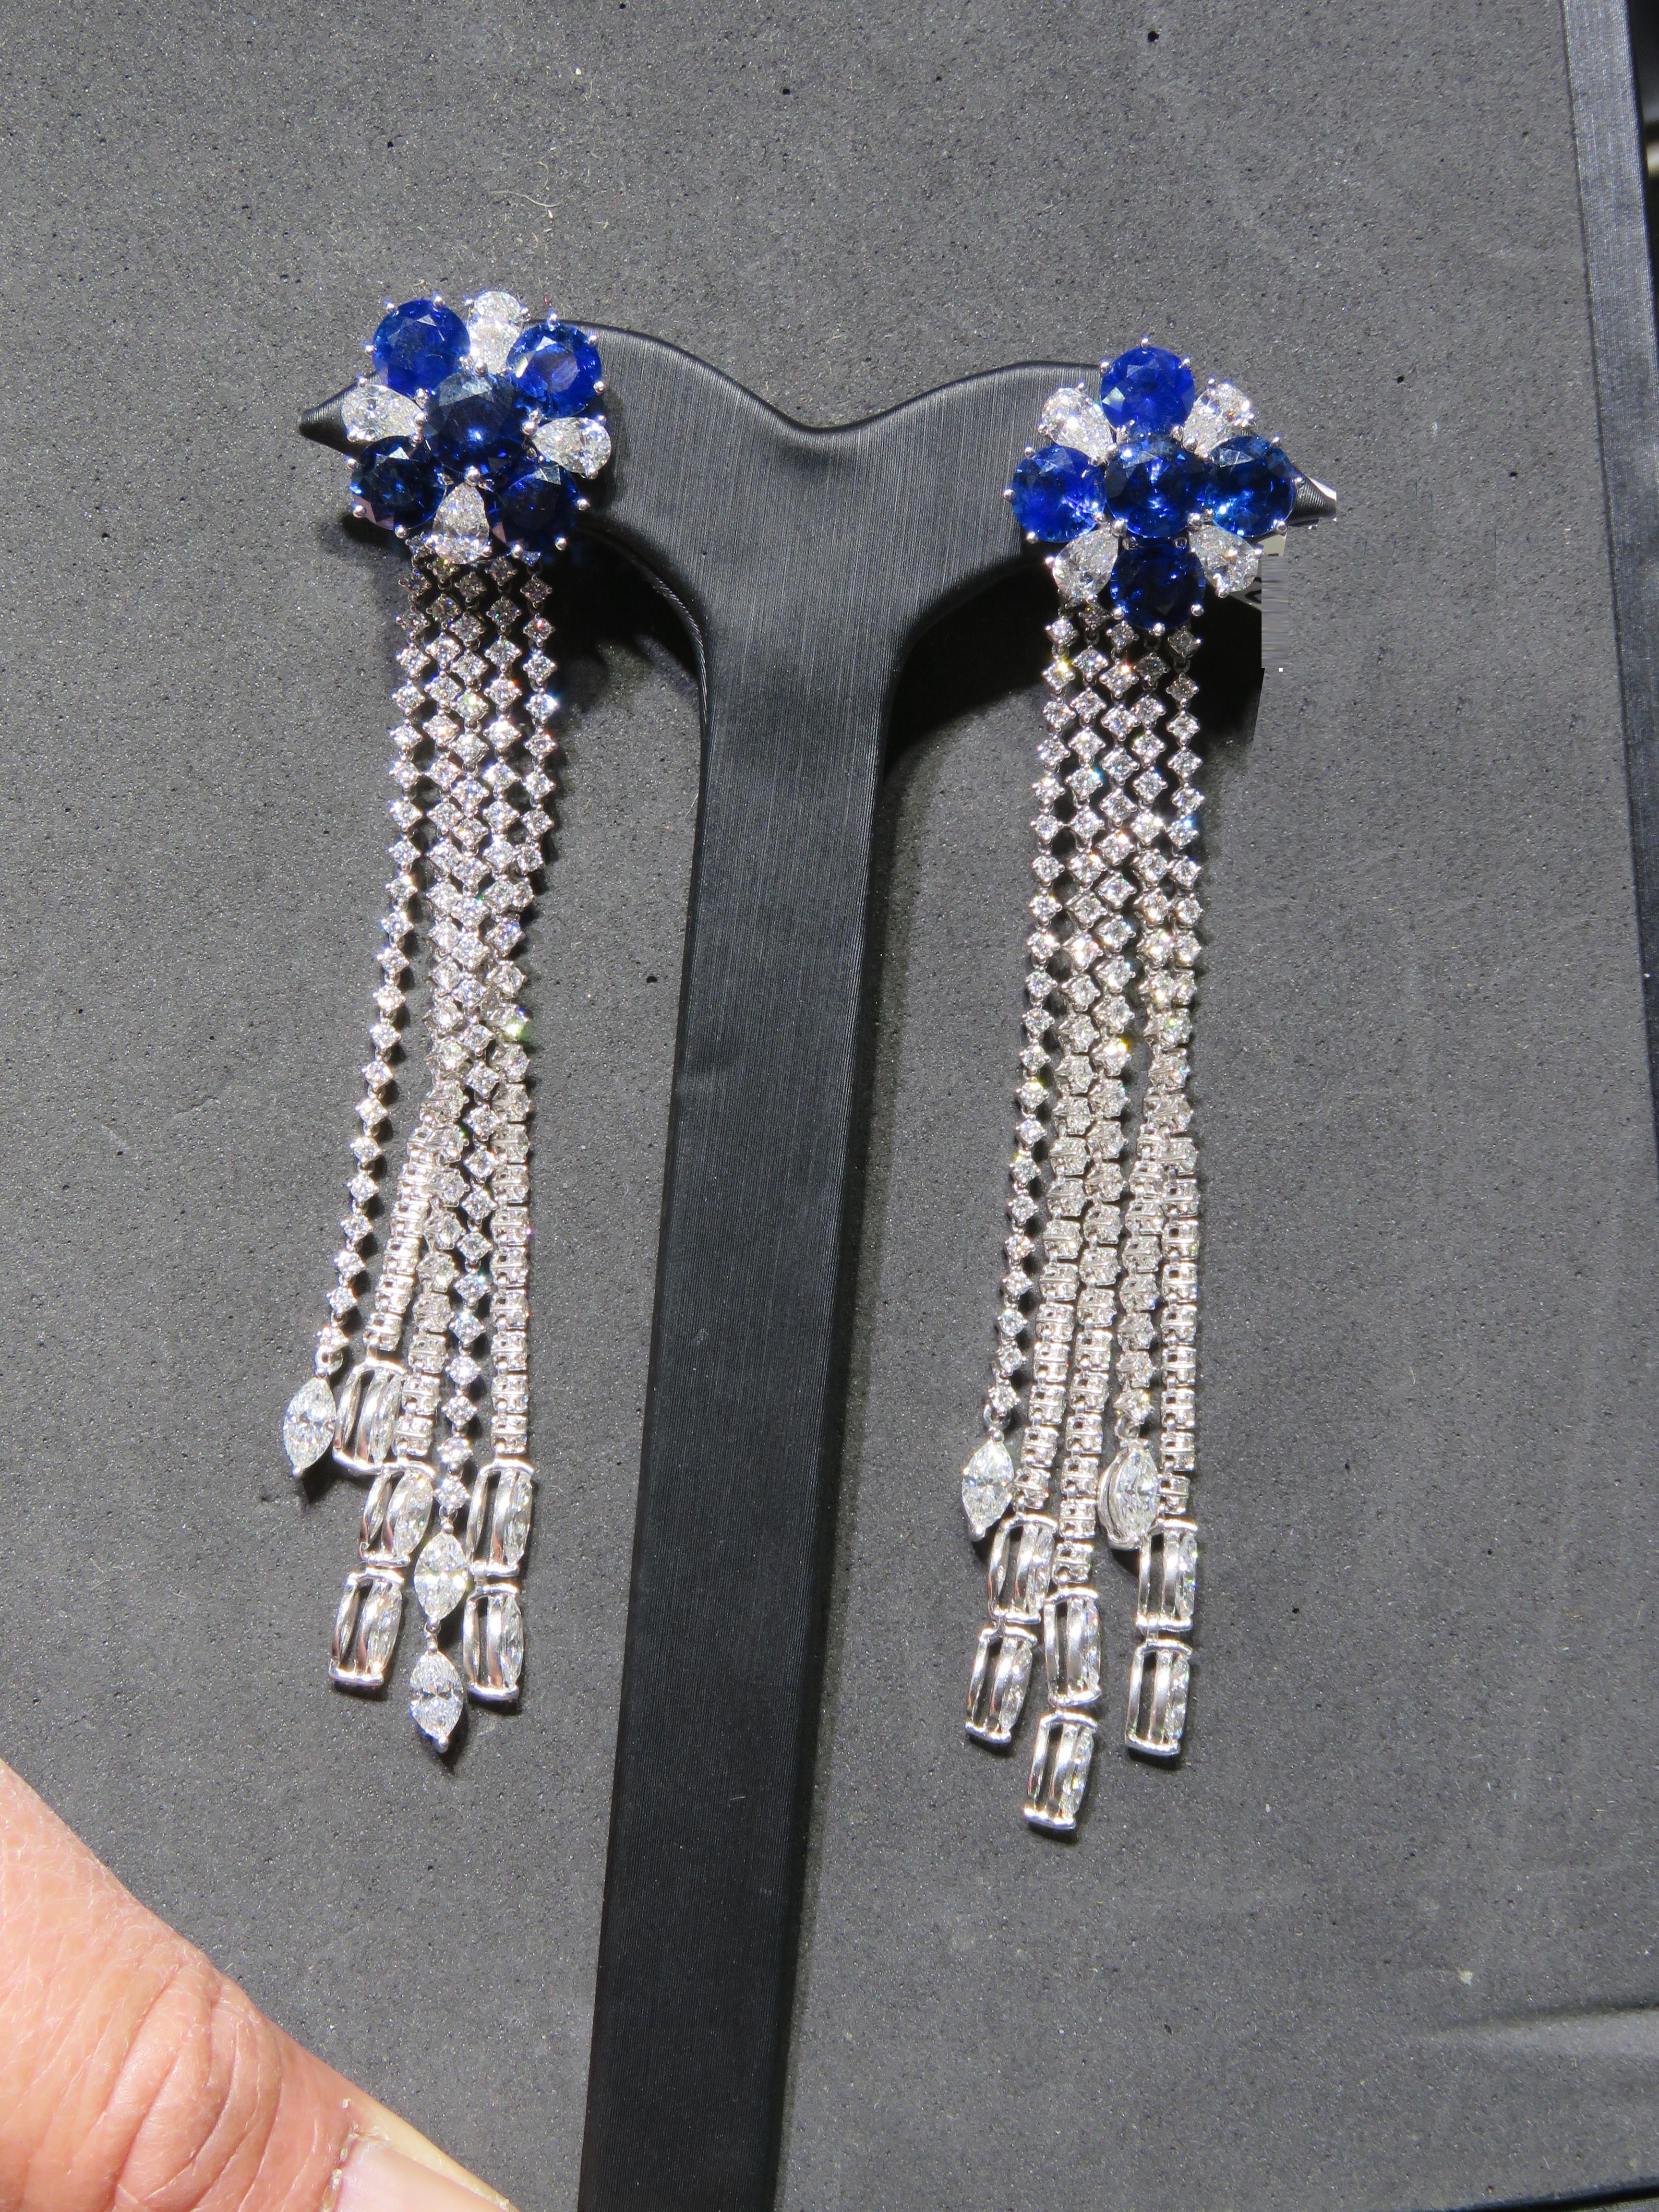 The Following Item we are offering is this Rare Important Radiant 18KT Gold Gorgeous Glittering and Sparkling Ceylon Blue Sapphire Diamond Dangle Earrings. Earrings Contains approx 26CTS of Beautiful Fancy Blue Sapphires and Fancy White Diamonds in